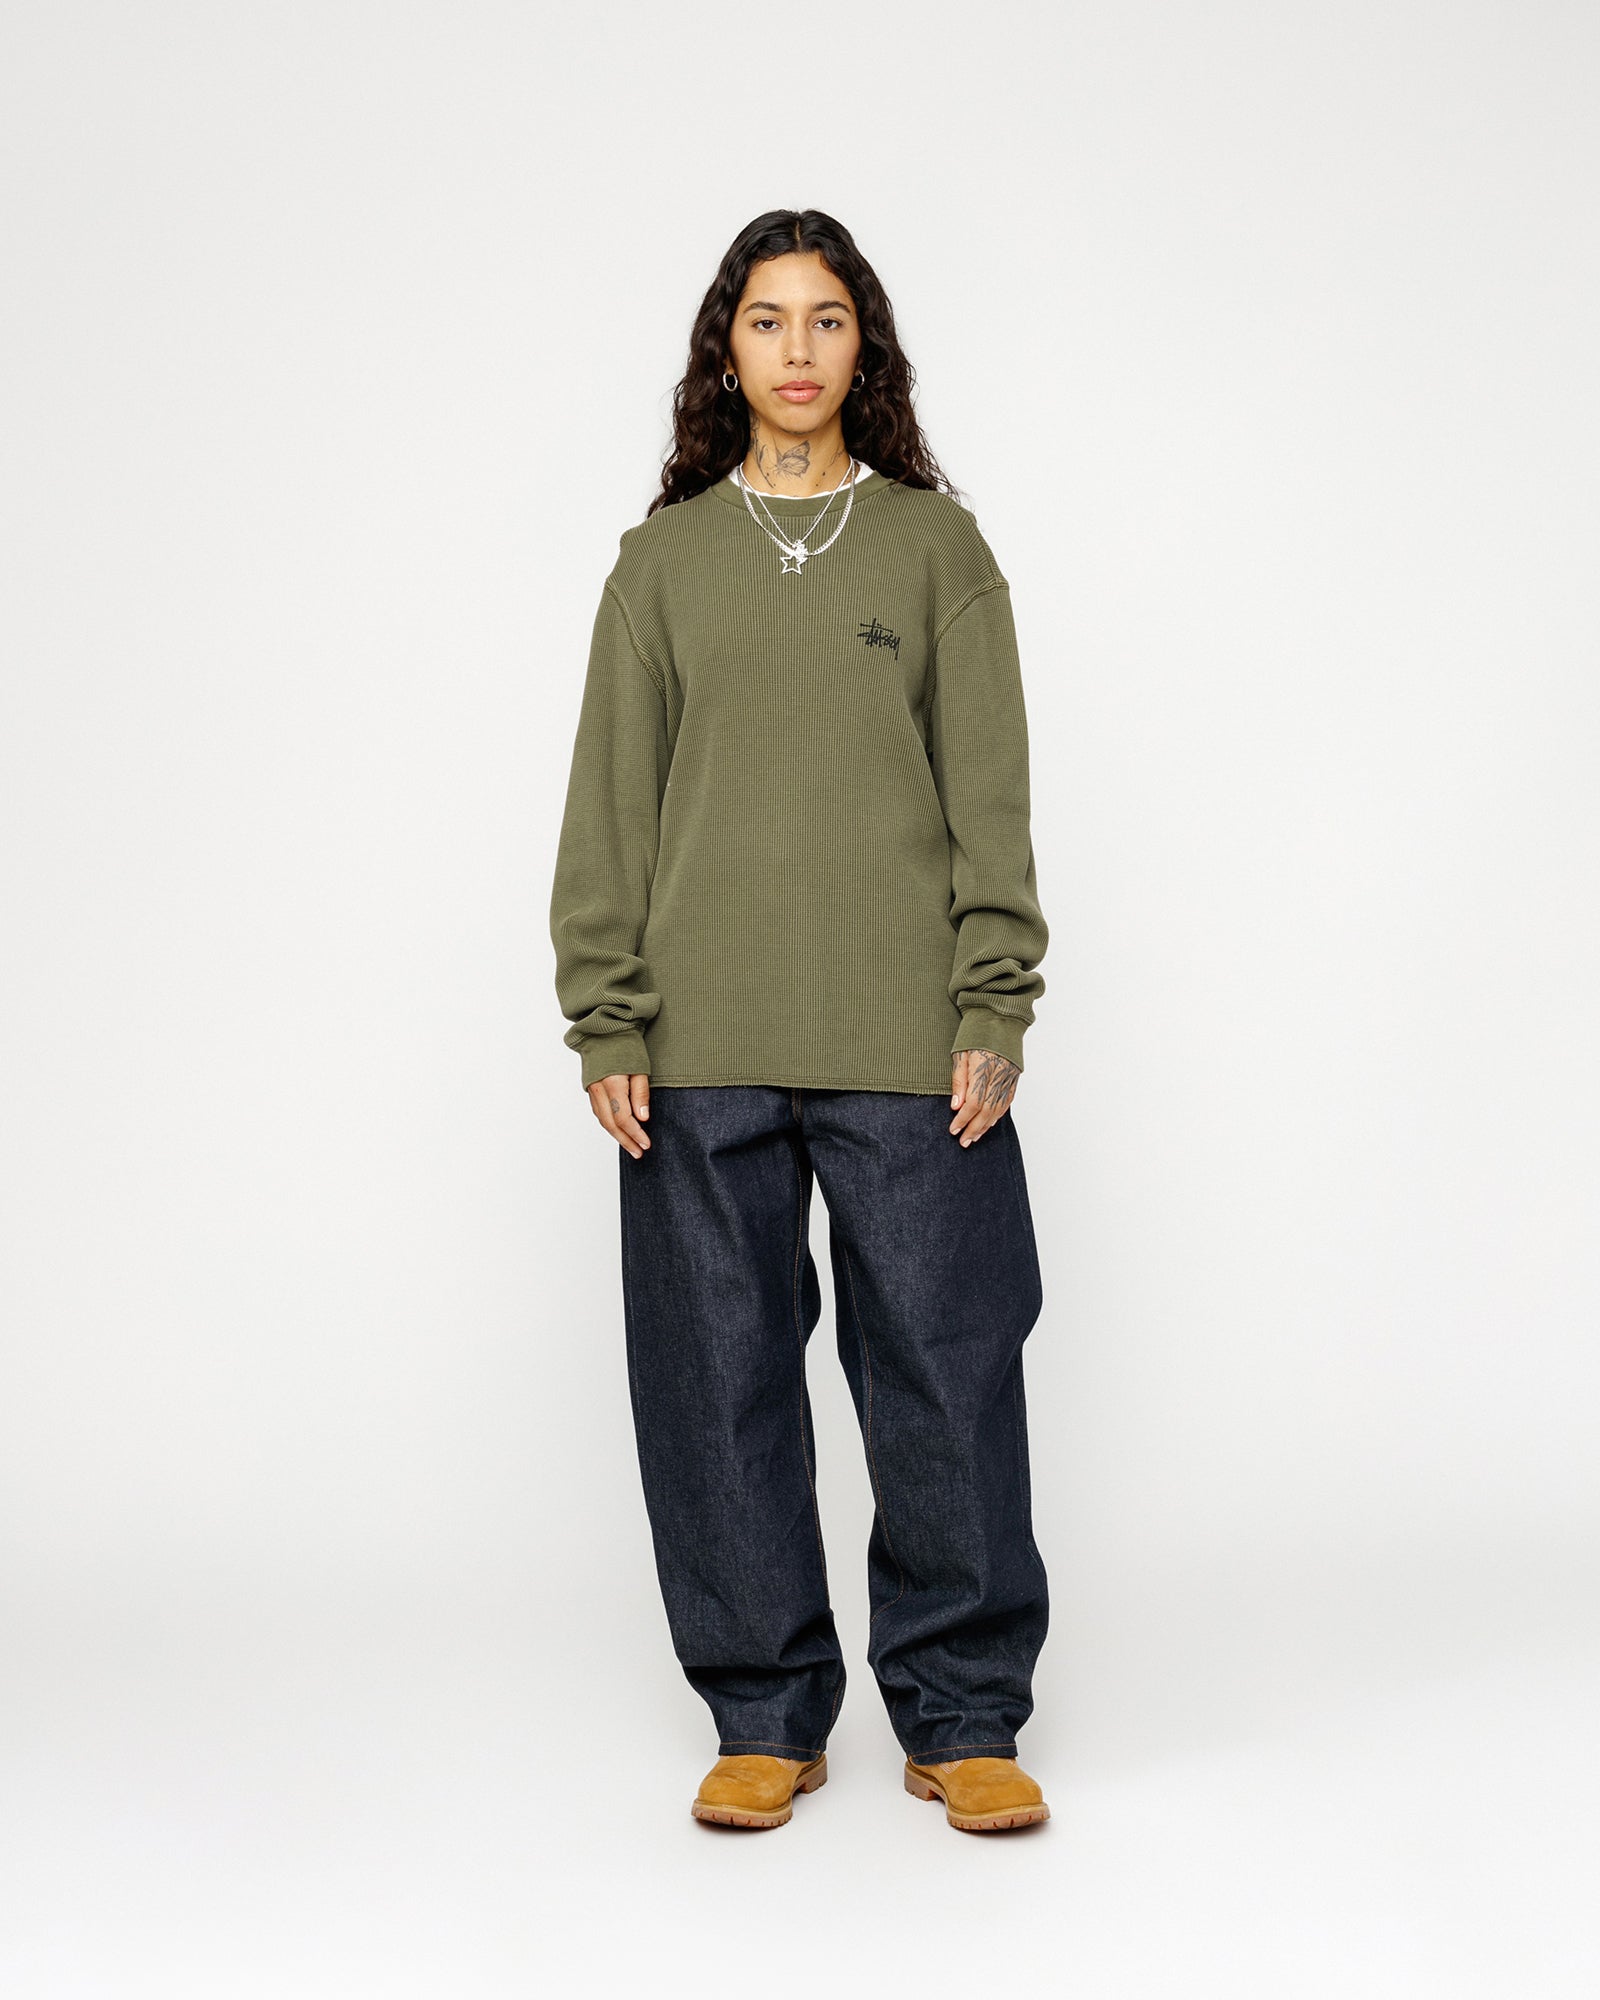 Basic Stock Ls Thermal Olive Tops